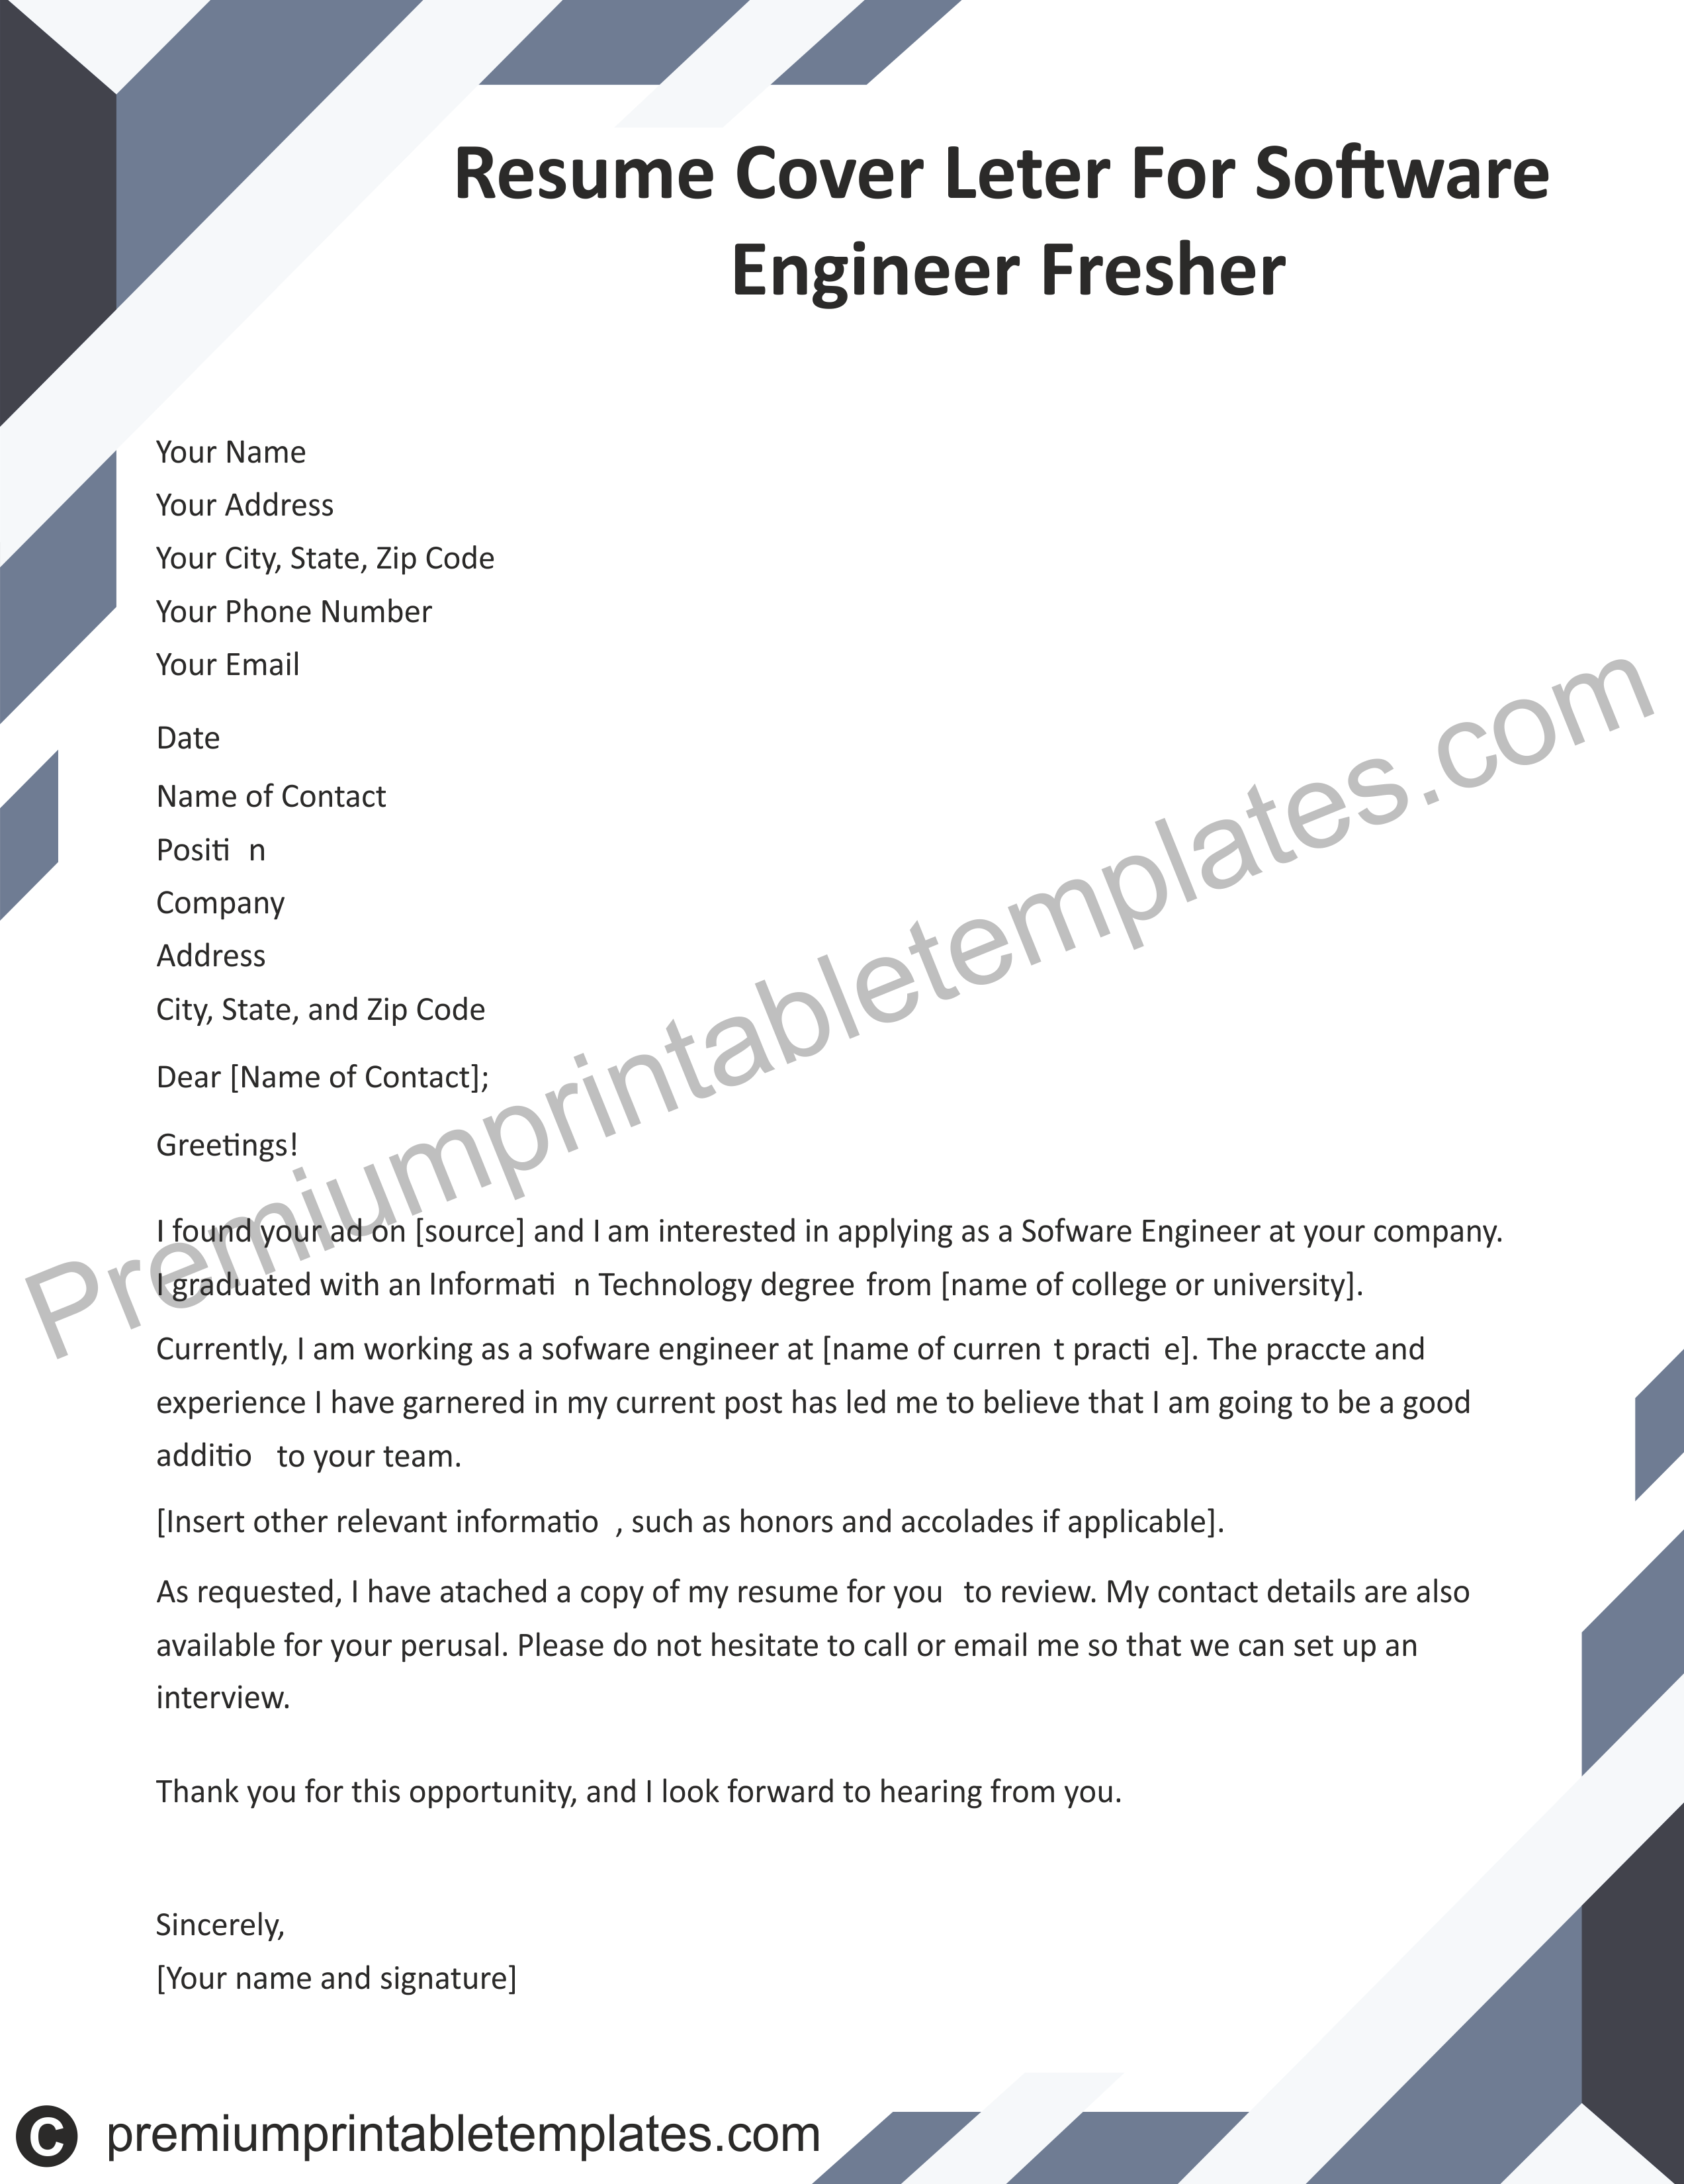 Computer engineer resume cover letter qa